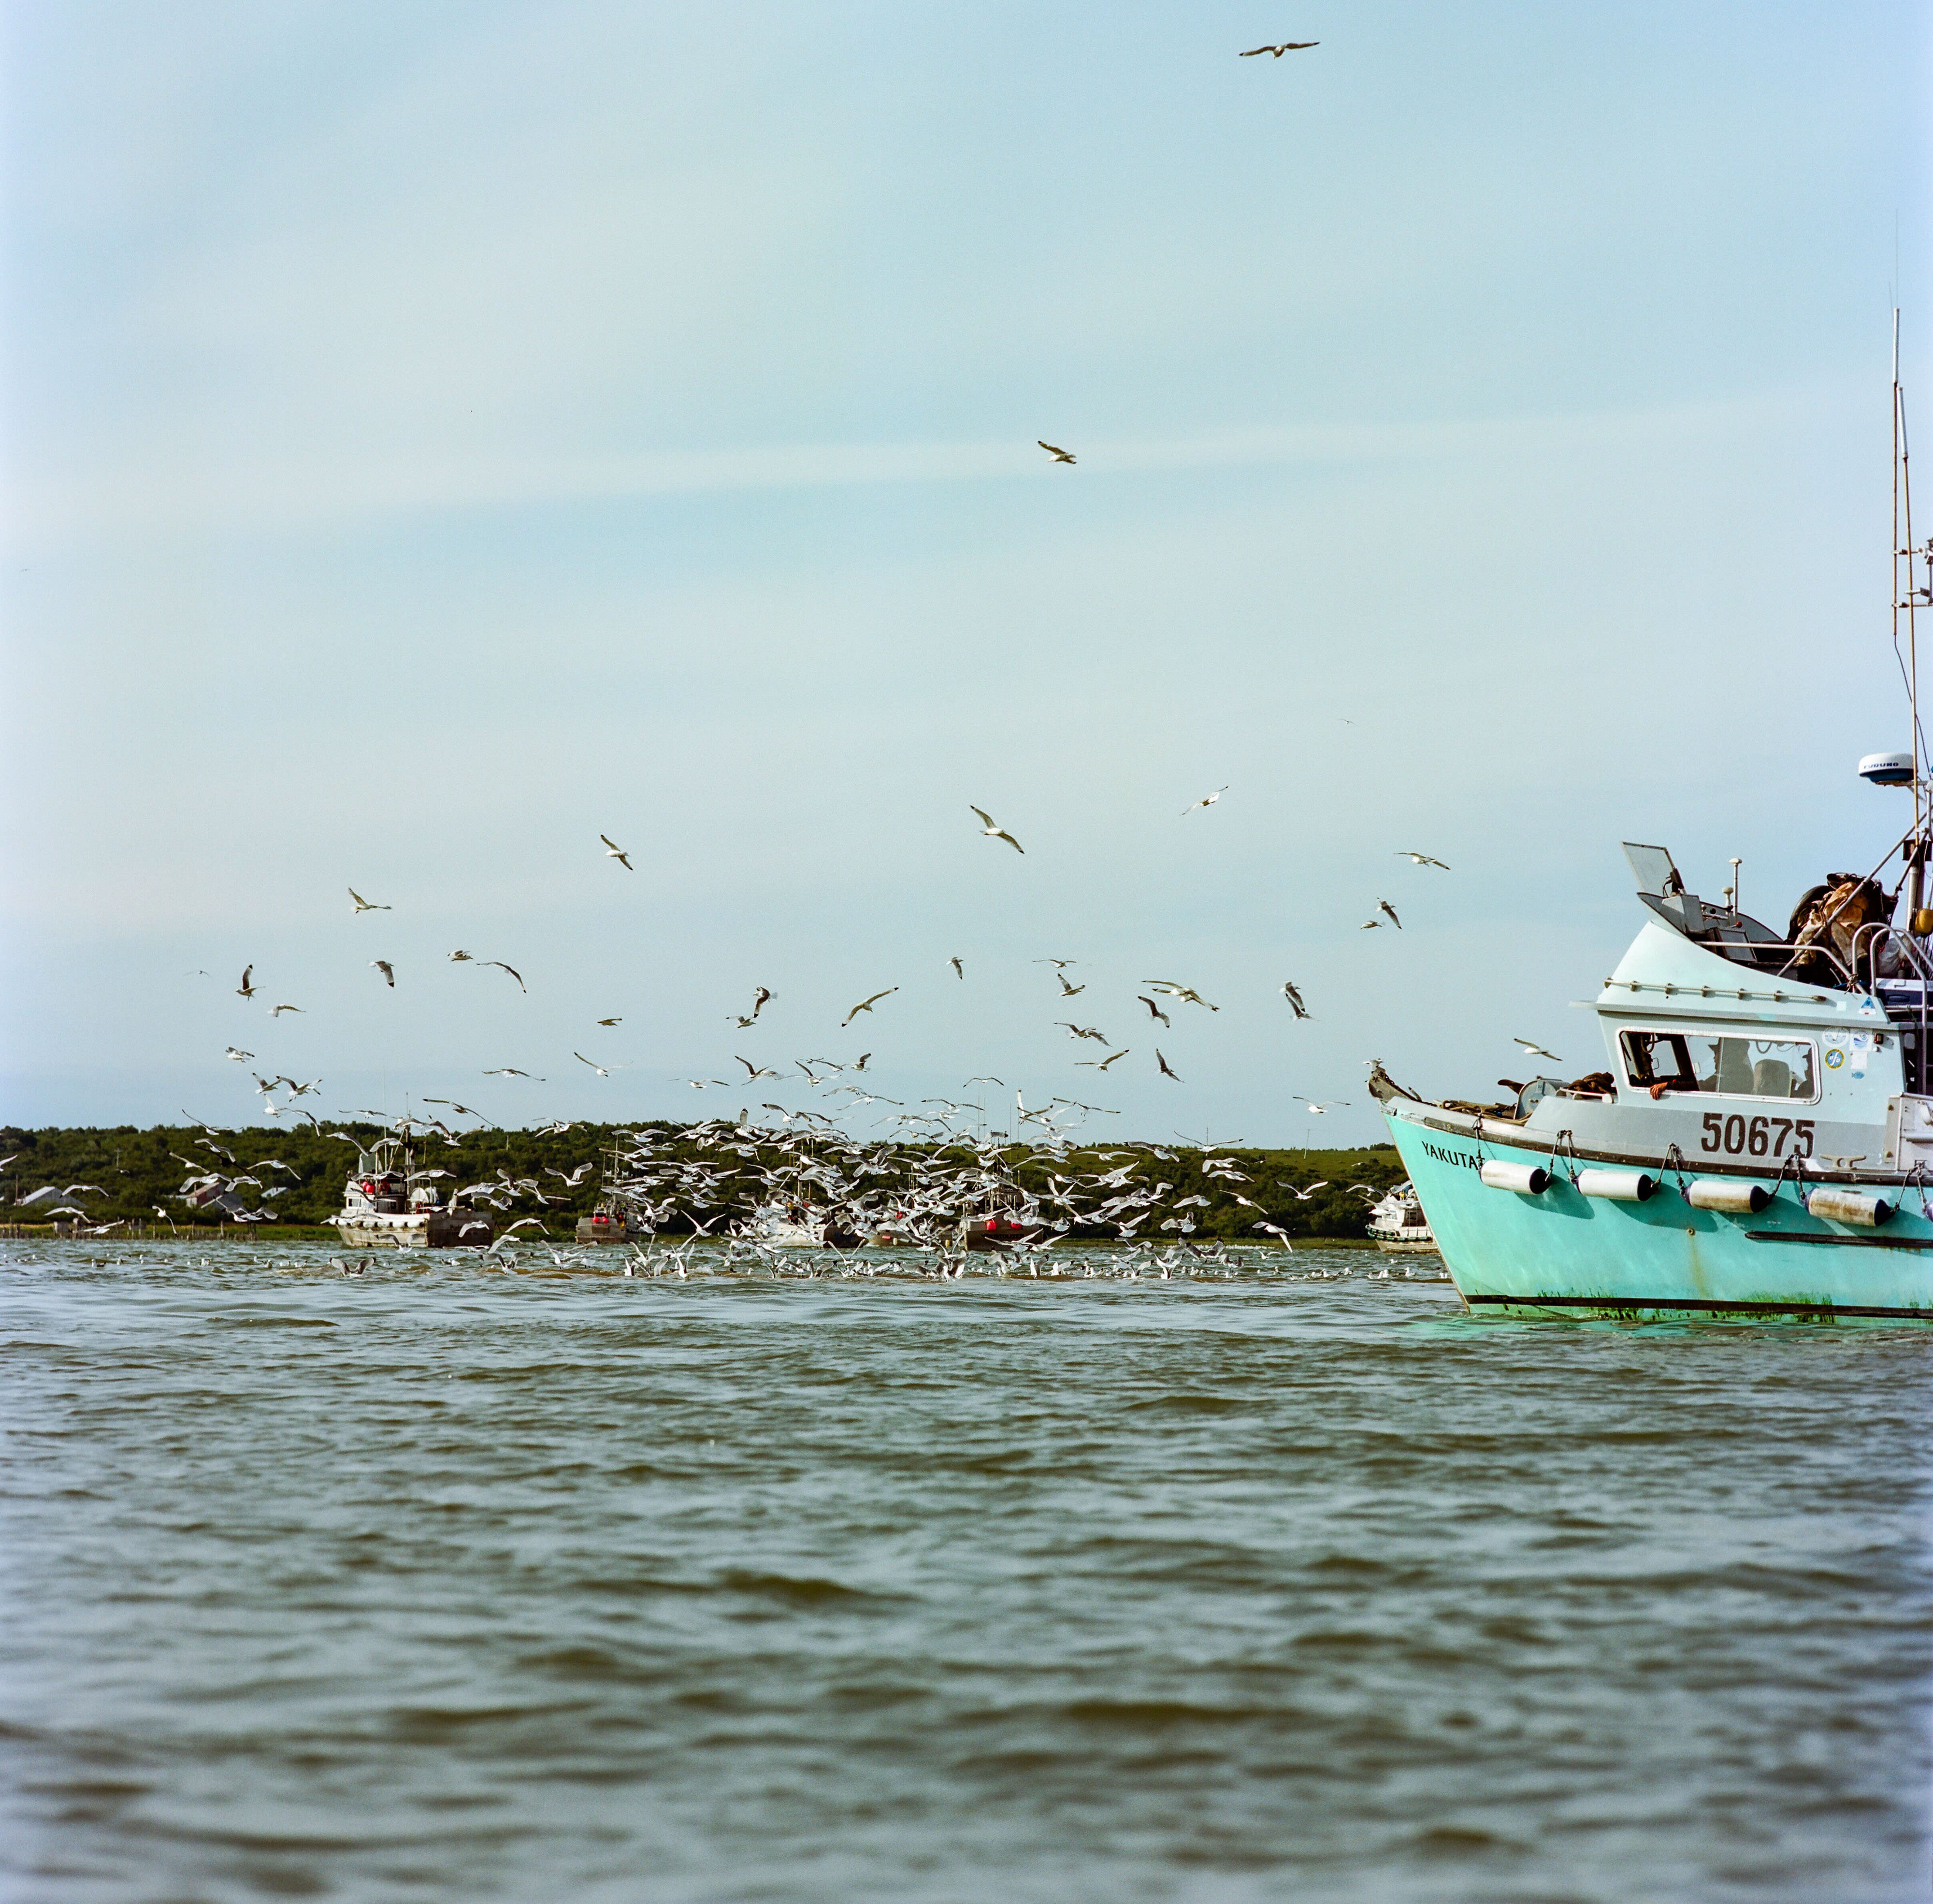 Several salmon fishing boats surrounded by gulls.